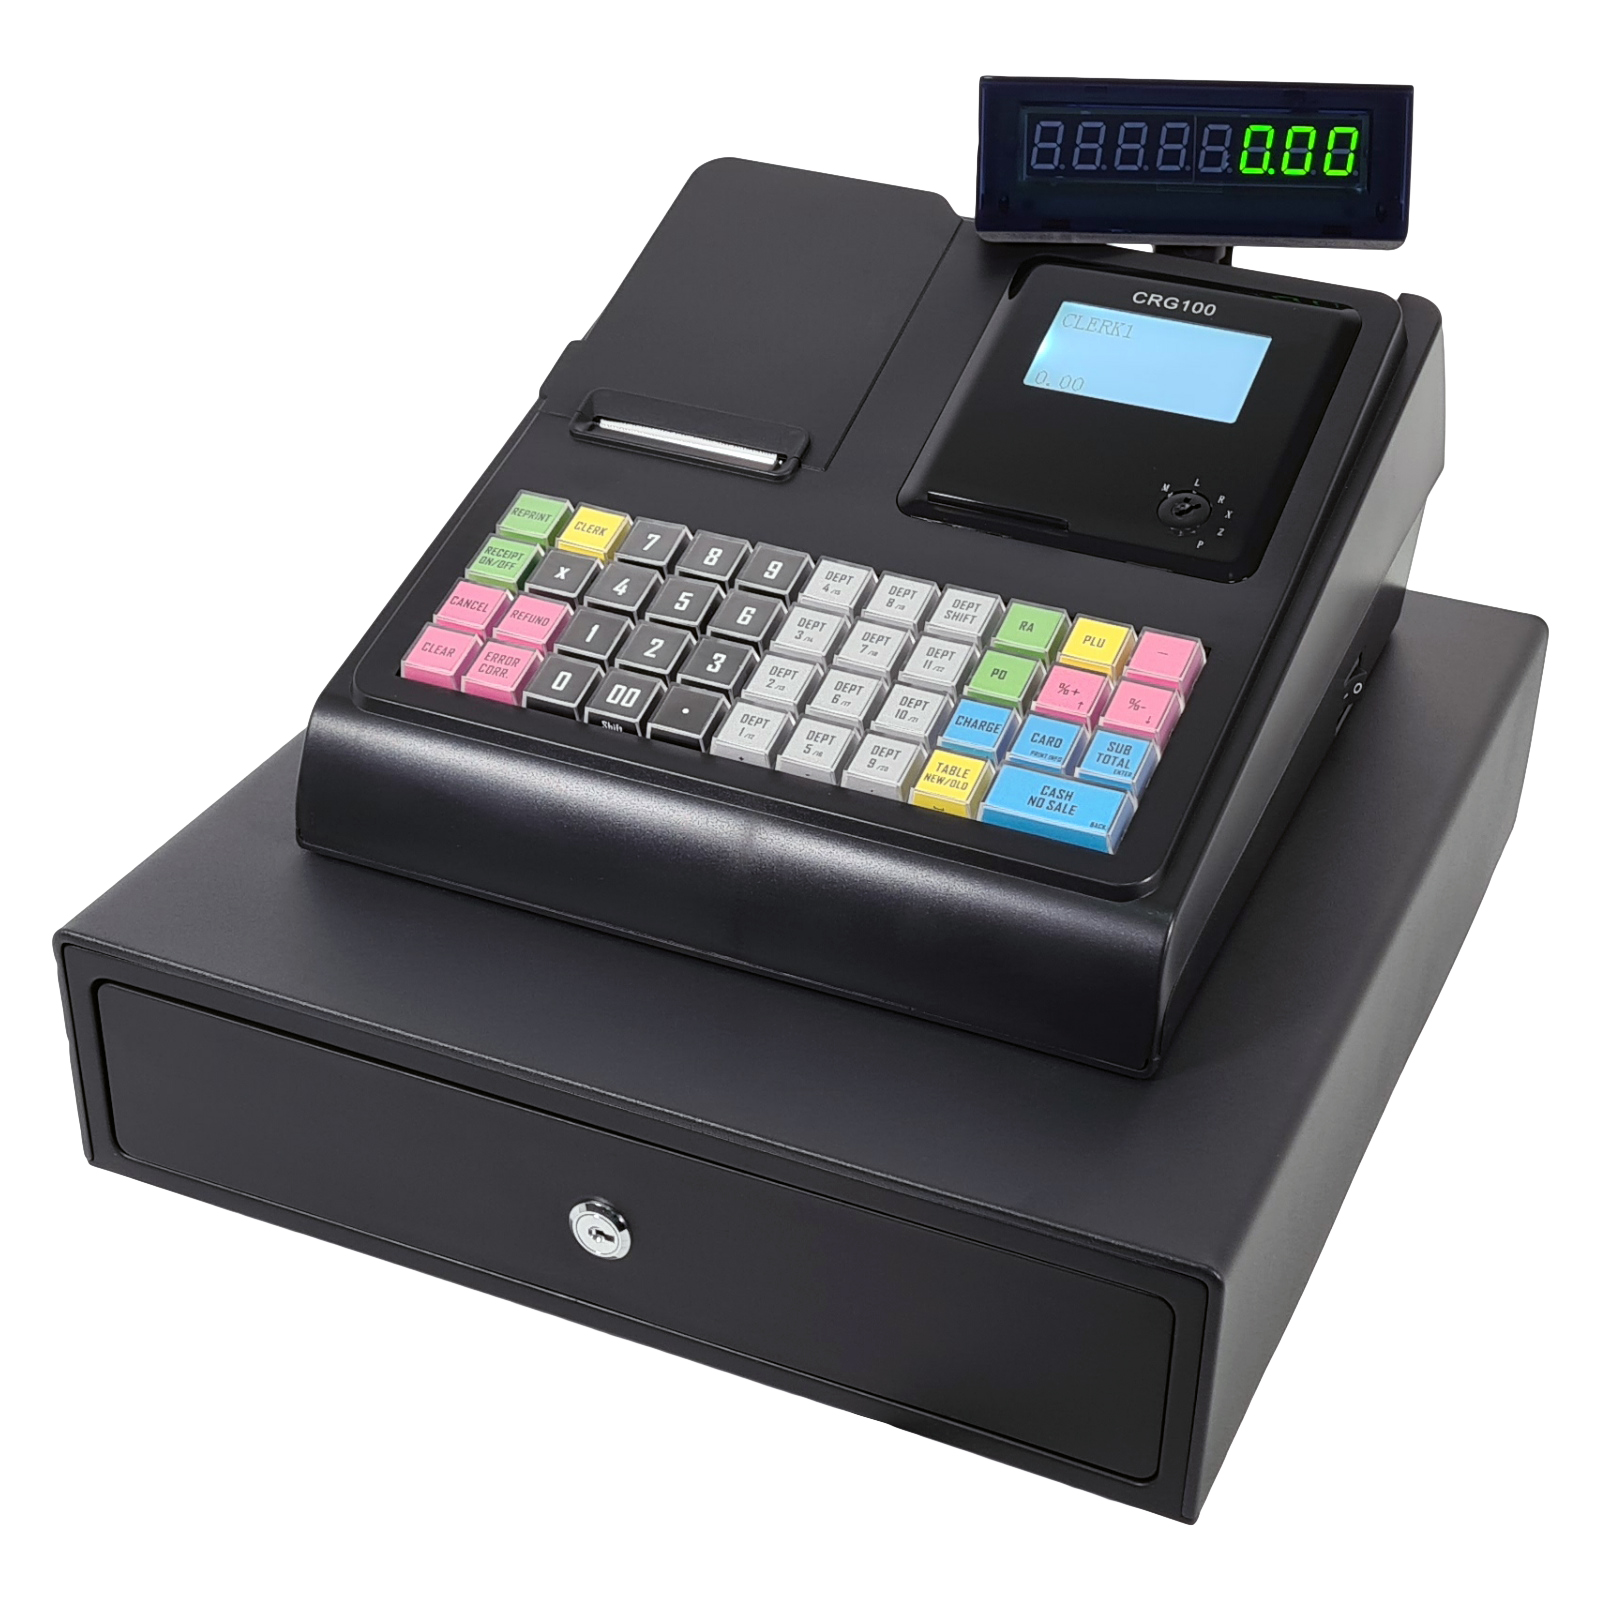 CRG100 Black Cash Register and Till Drawer - OUT OF STOCK - Please see CRG100 White